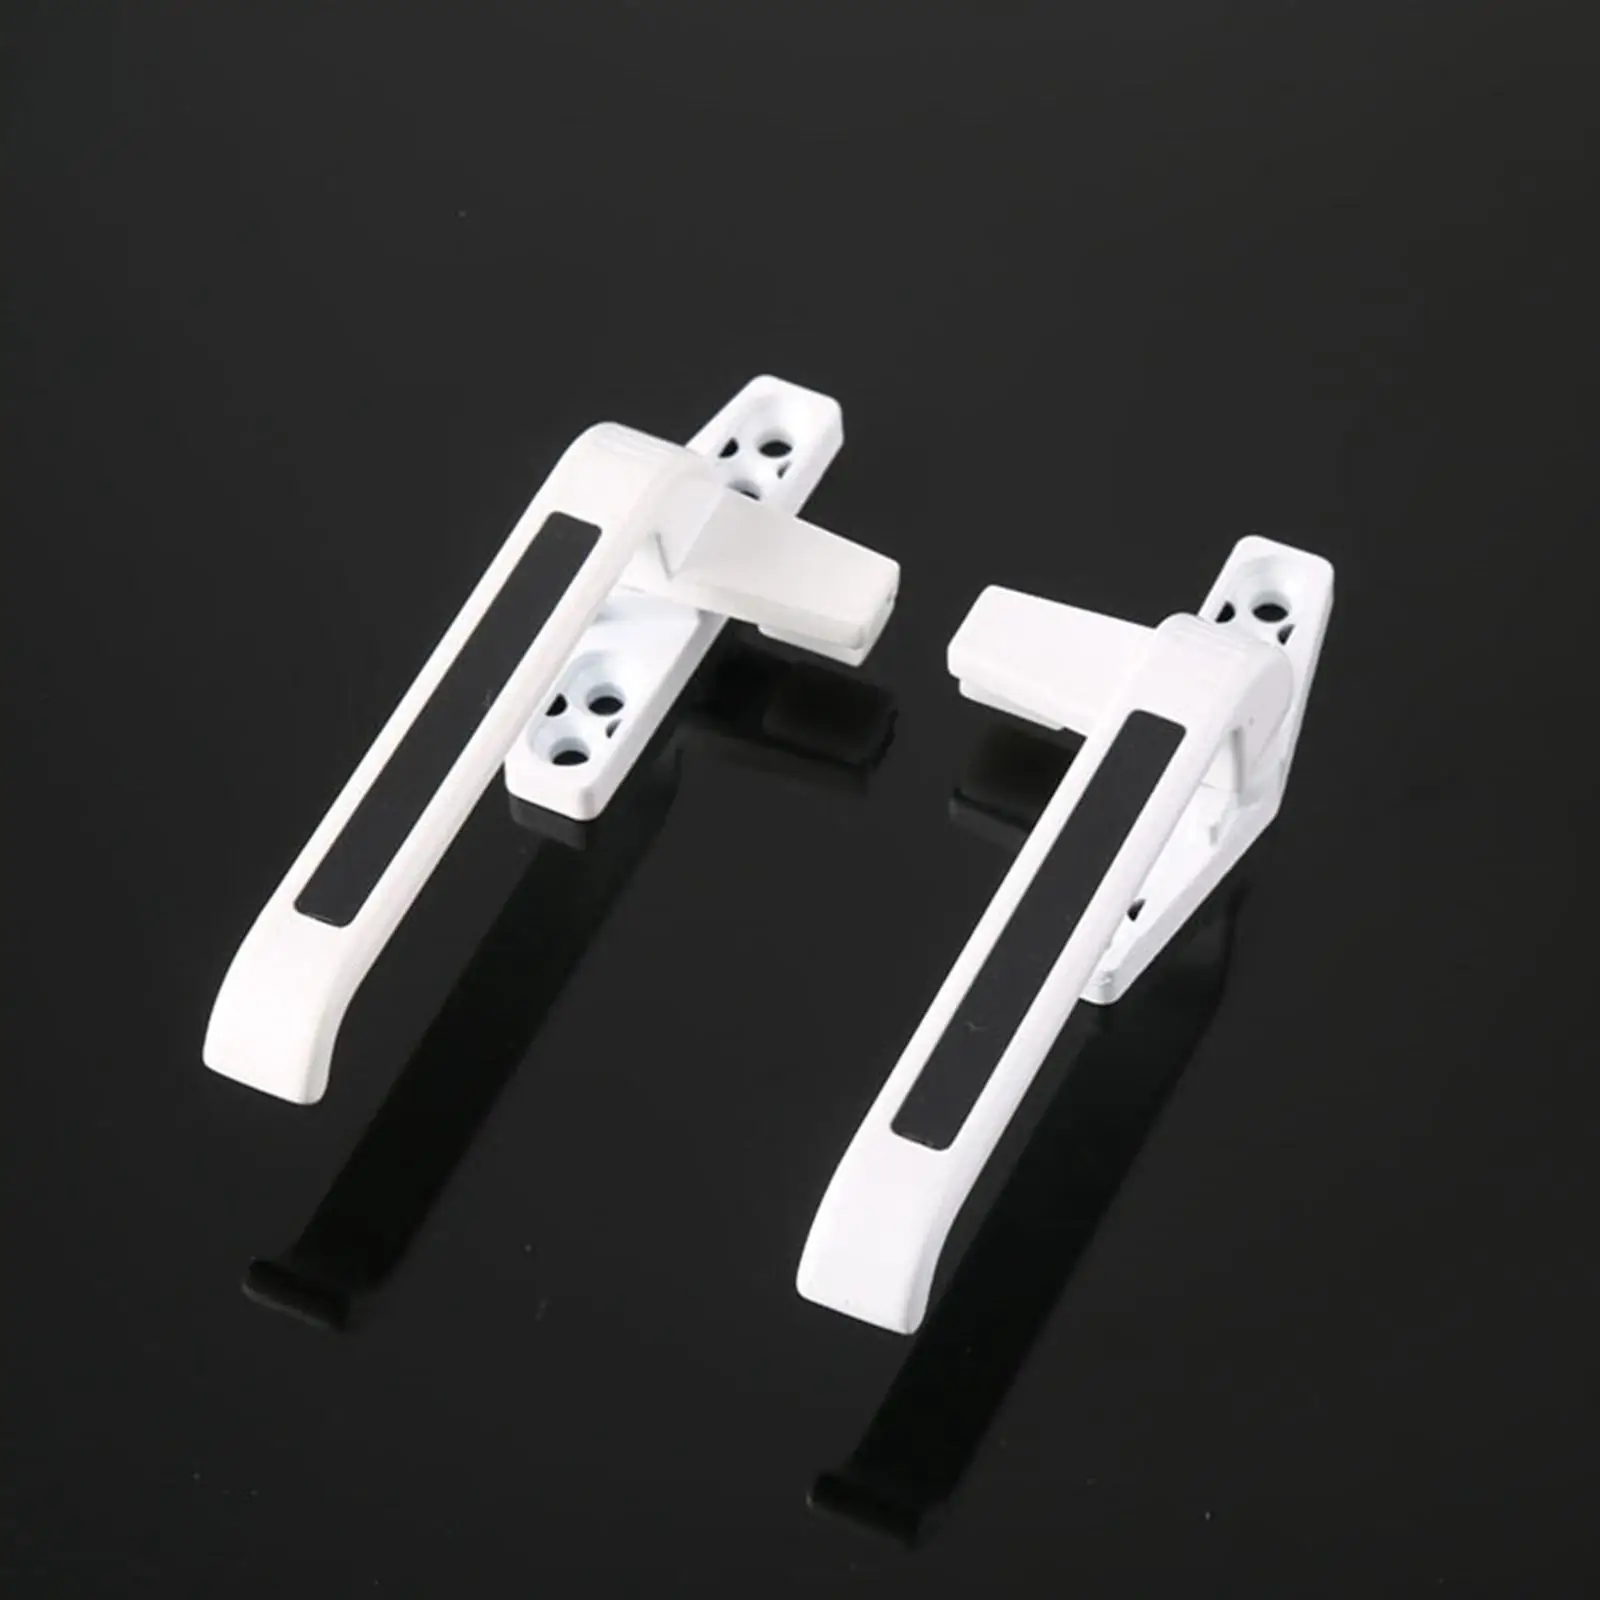 2x Zinc Alloy Window Handle Locking Replacement Support Left Right Hand for Bathroom